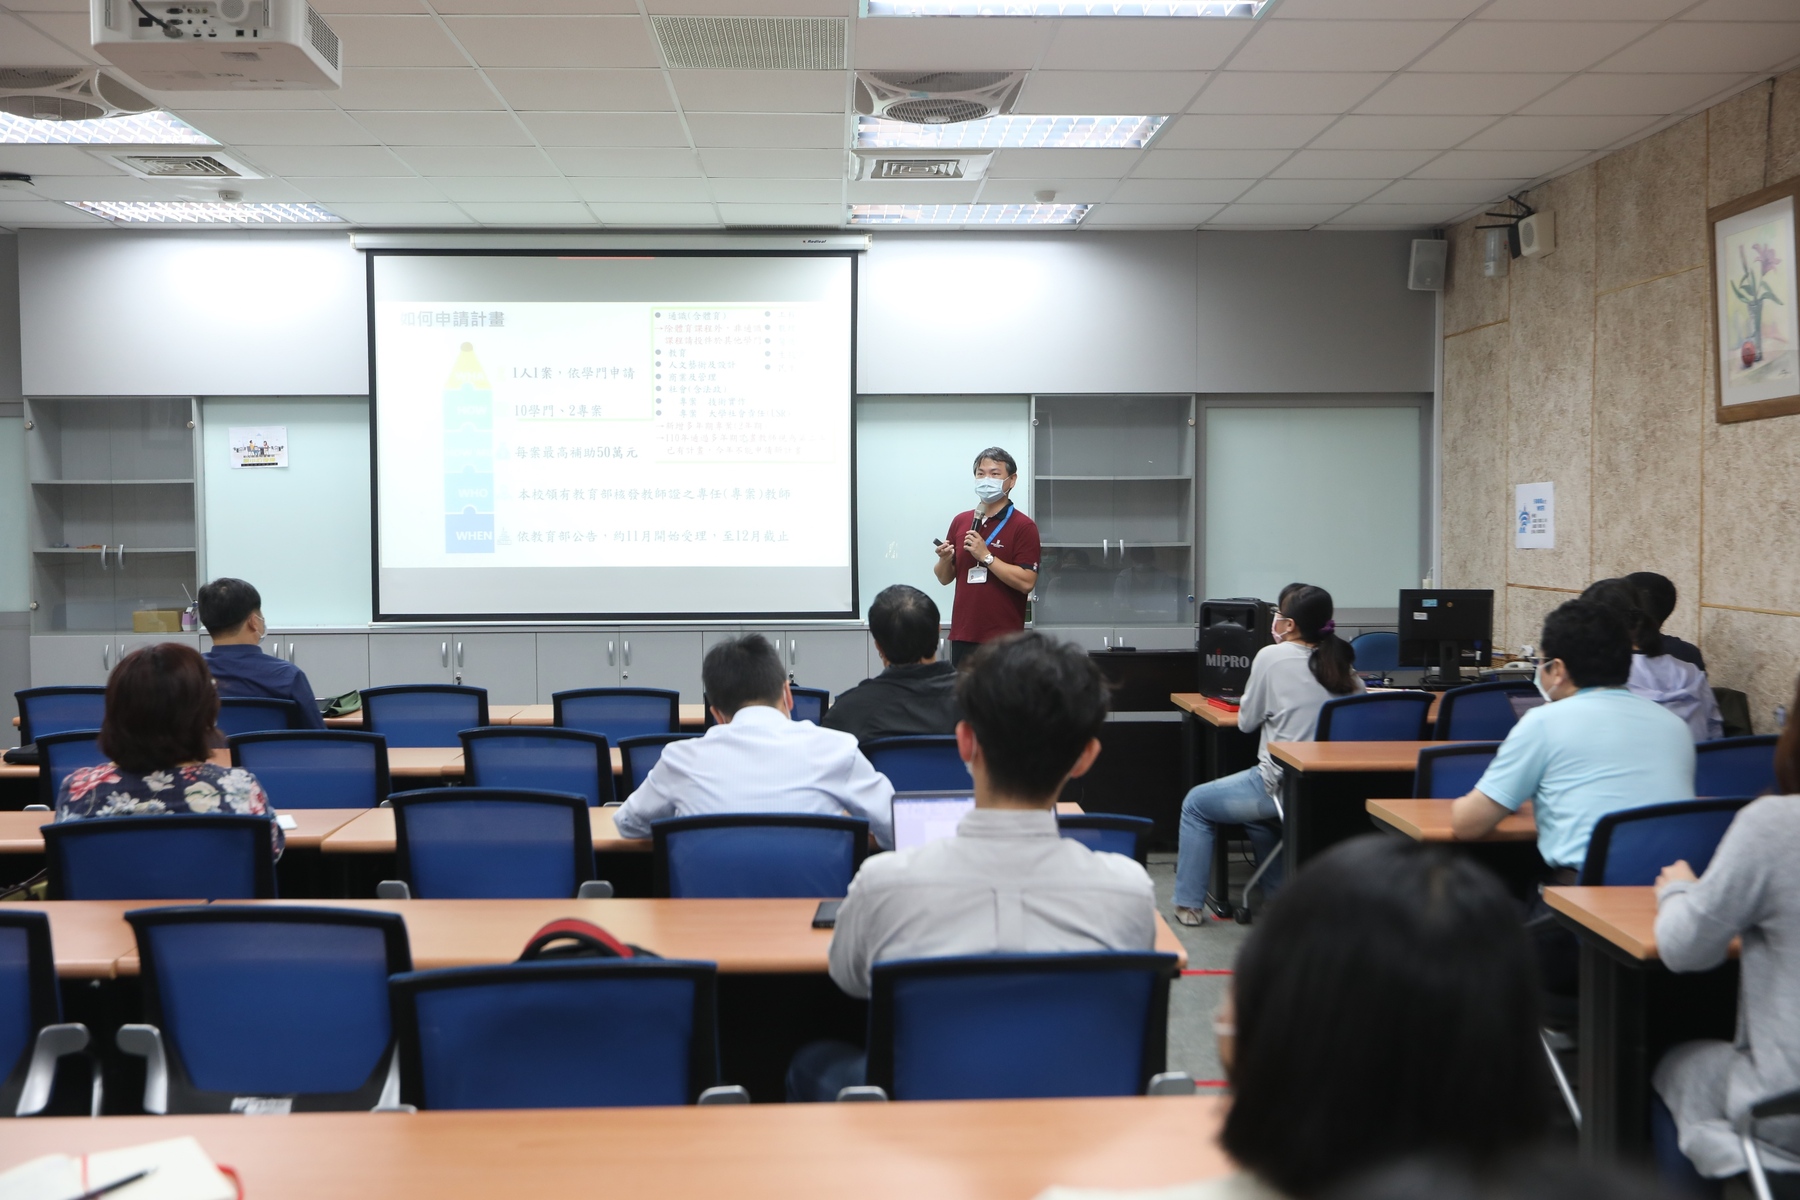 Professor Tong-Yu Hsieh, the Associate Vice President for Academic Affairs, pointed out that asking questions on the spot is the core of teaching practice research.